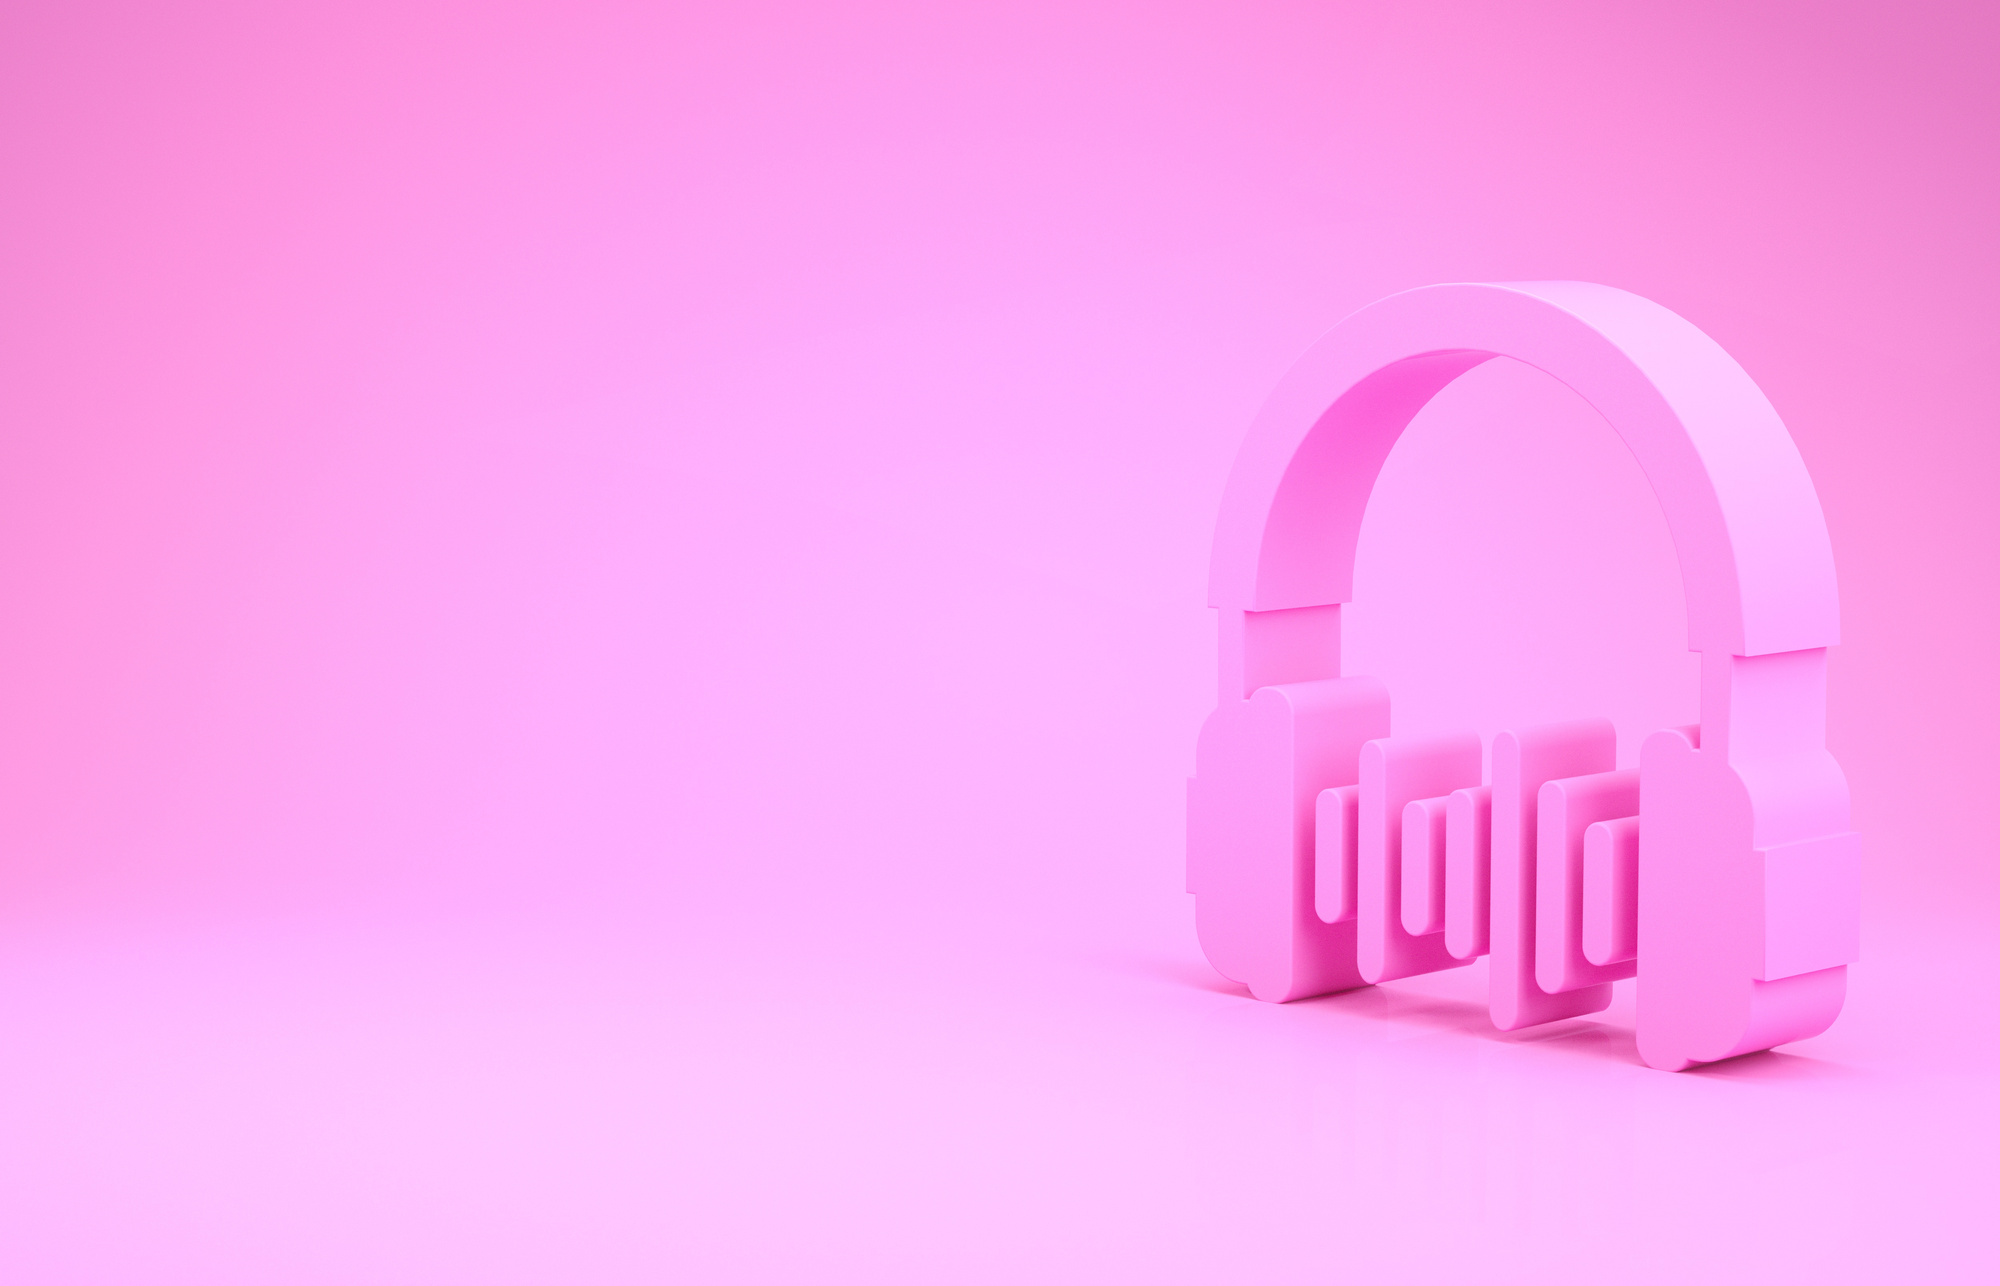 Pink Headphone and Sound Waves Icon Isolated on Pink Background. Concept Object for Listening to Music, Service, Communication and Operator. Minimalism Concept. 3D Illustration 3D Render